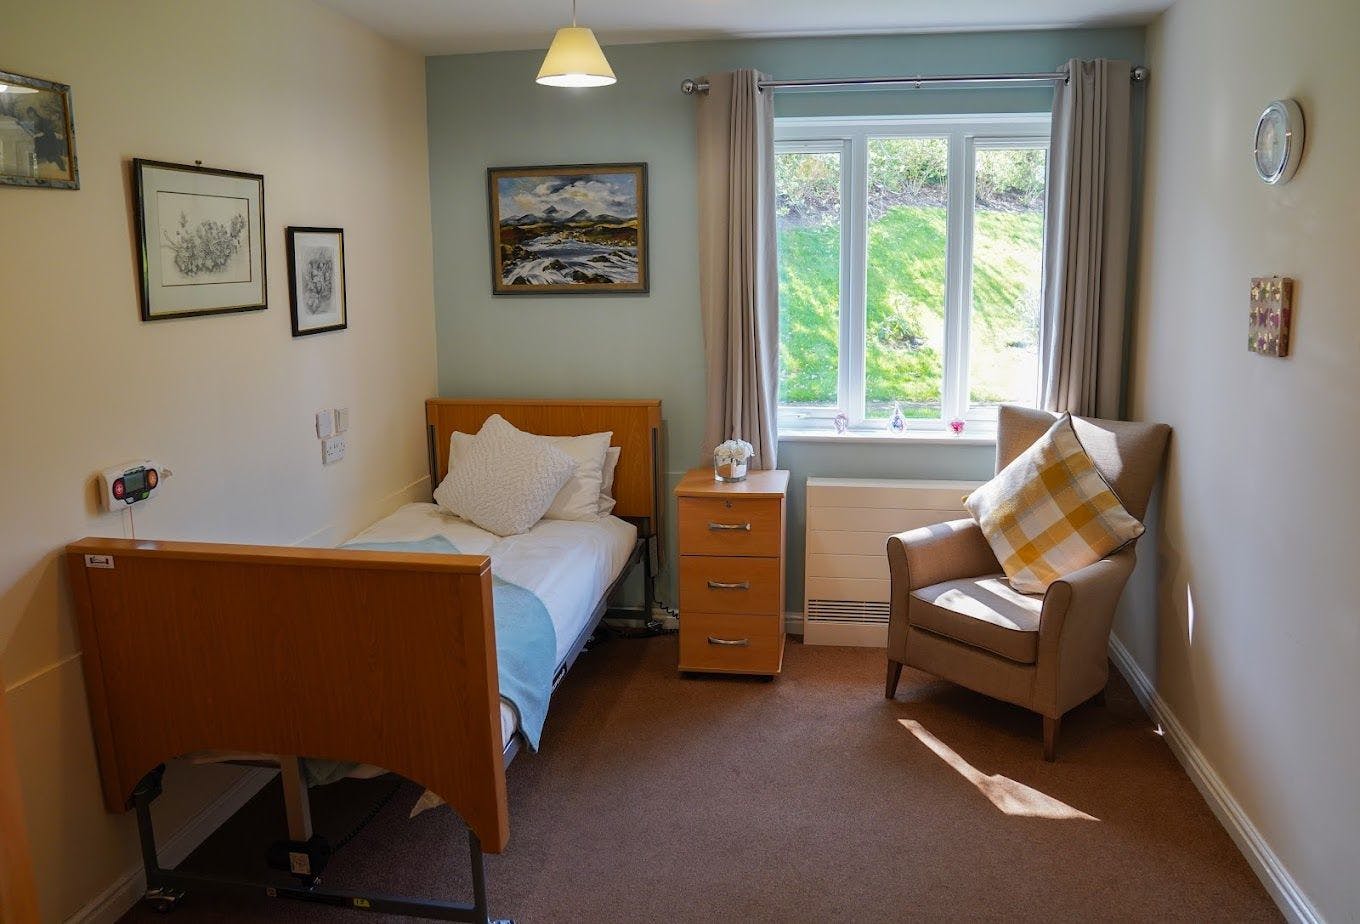 Bedroom at Allanbank Care Home in Dumfries and Galloway, Stewartry of Kirkcudbright